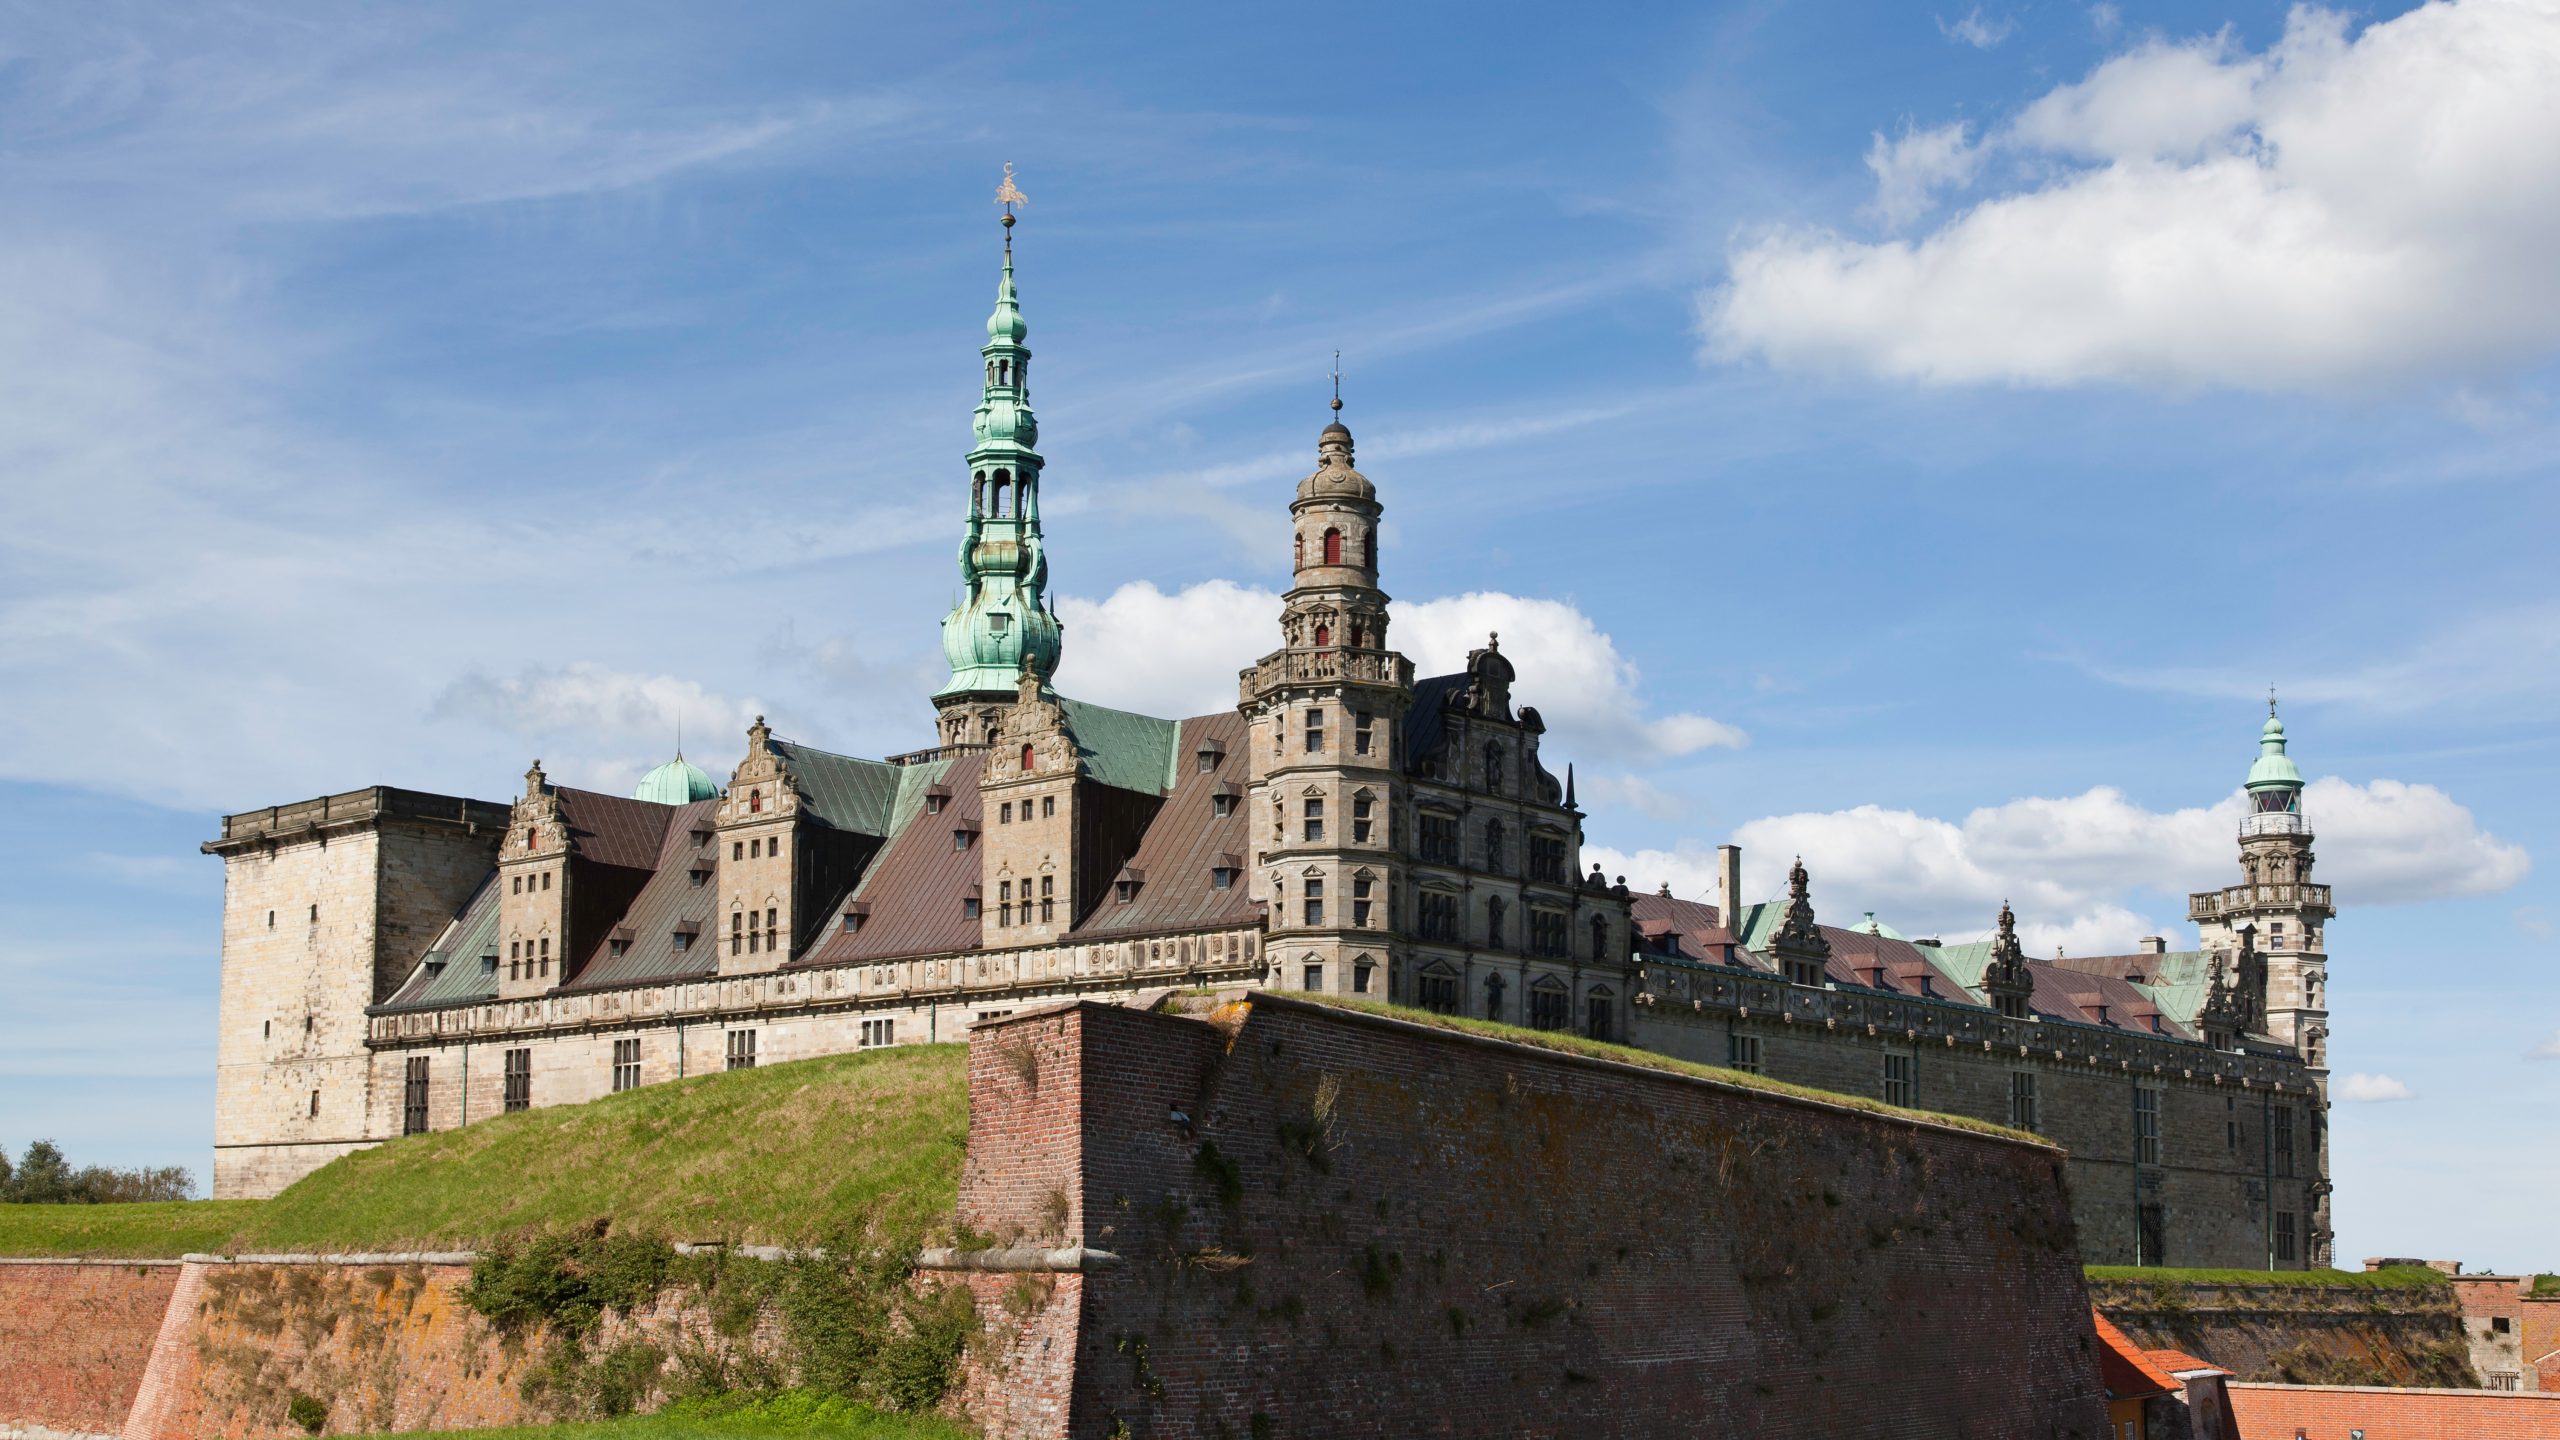 Explore Kronborg Castle - the third thing in the 10 best things to do in Denmark